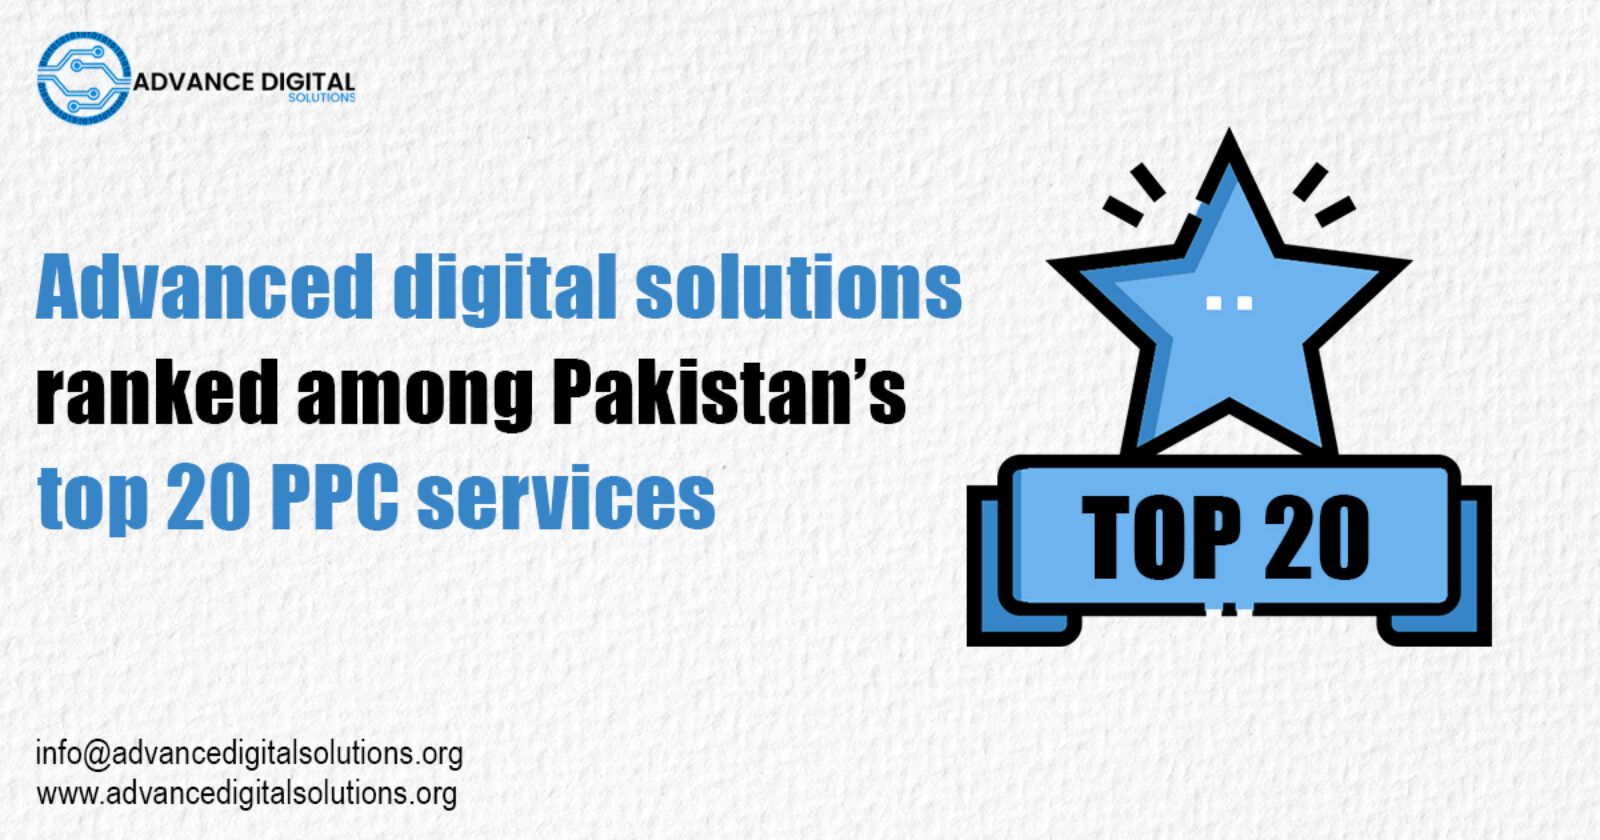 Advanced digital solutions ranked among Pakistan’s top PPC services